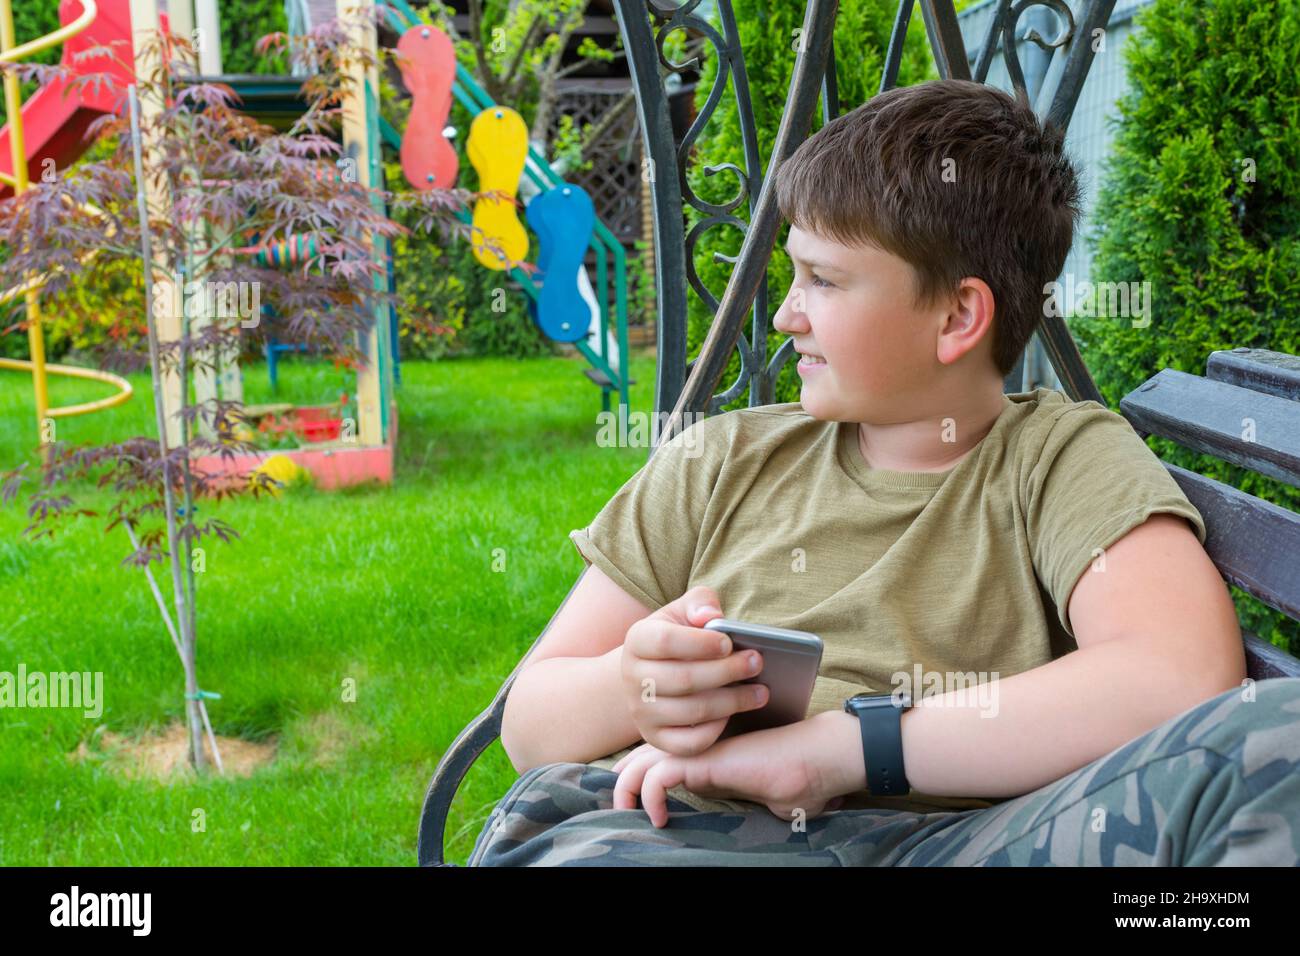 A boy with a phone and smart watch in the backyard Stock Photo